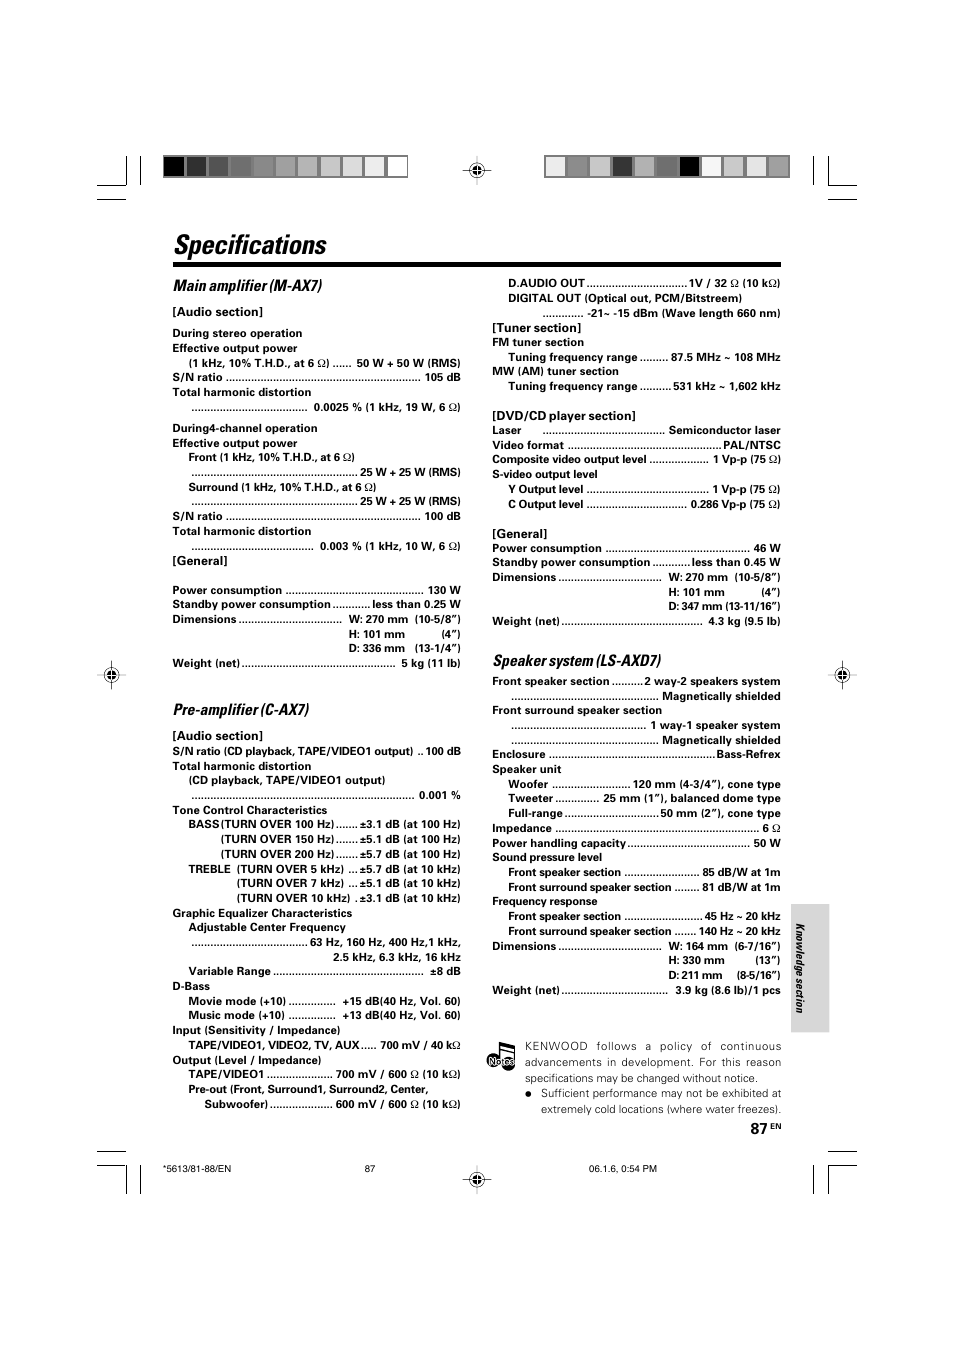 Specifications, Main amplifier (m-ax7), Pre-amplifier (c-ax7) | Kenwood AX-7  User Manual | Page 87 / 88 | Original mode